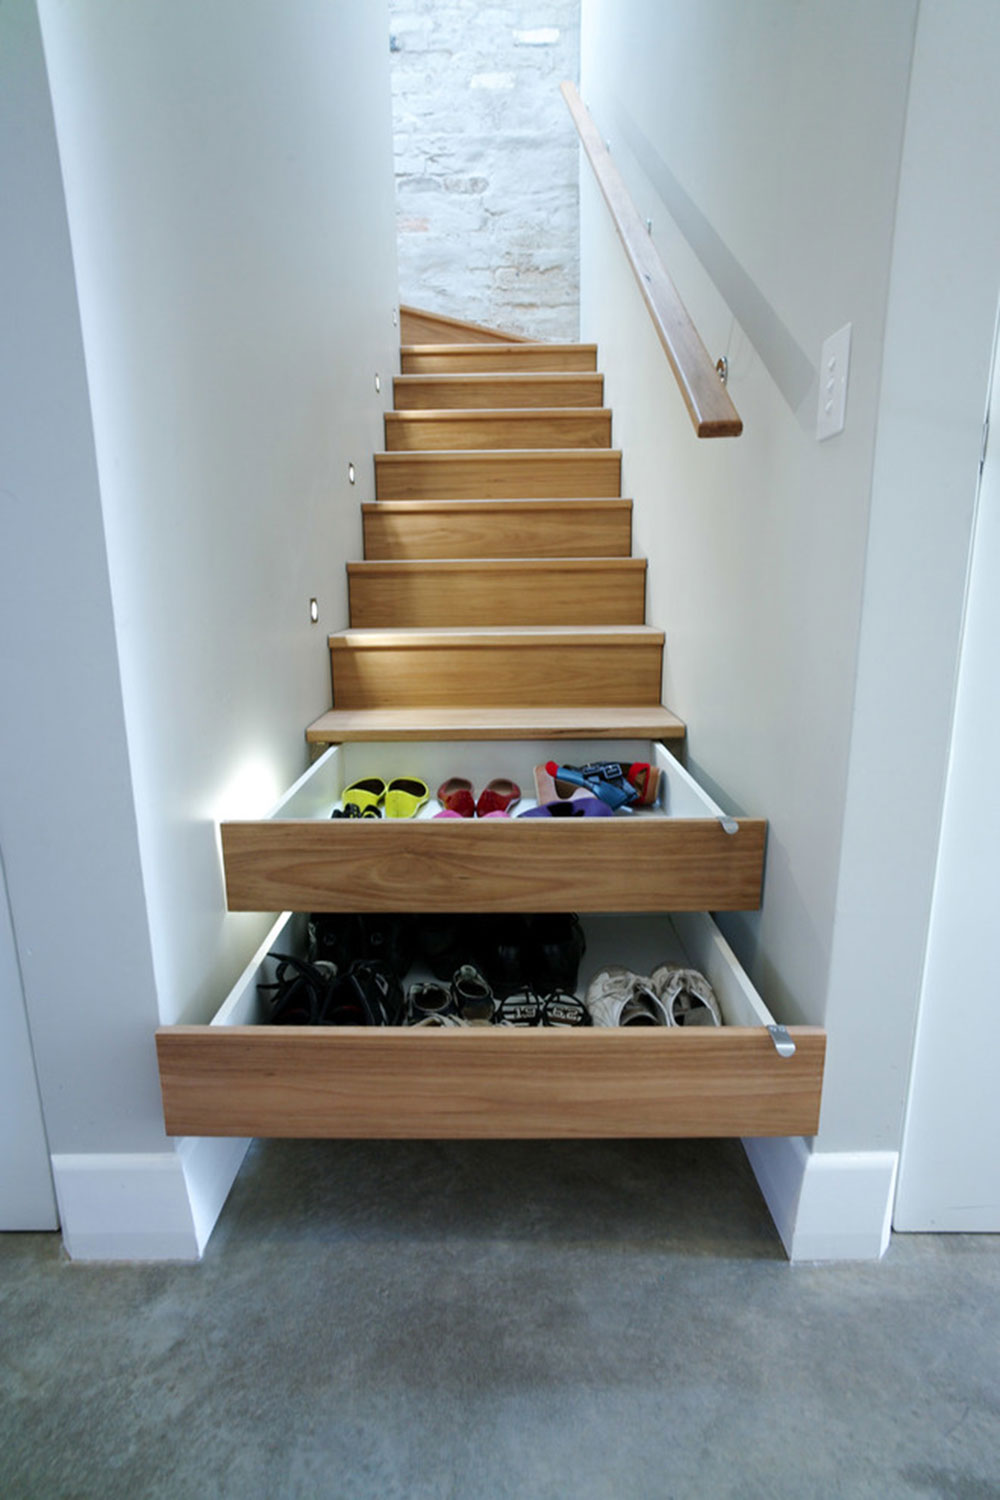 Make-Your-Dreams-Come-True-With-These-Shoe-Storage-Ideas22 Shoe Storage Ideas For Better Organizing